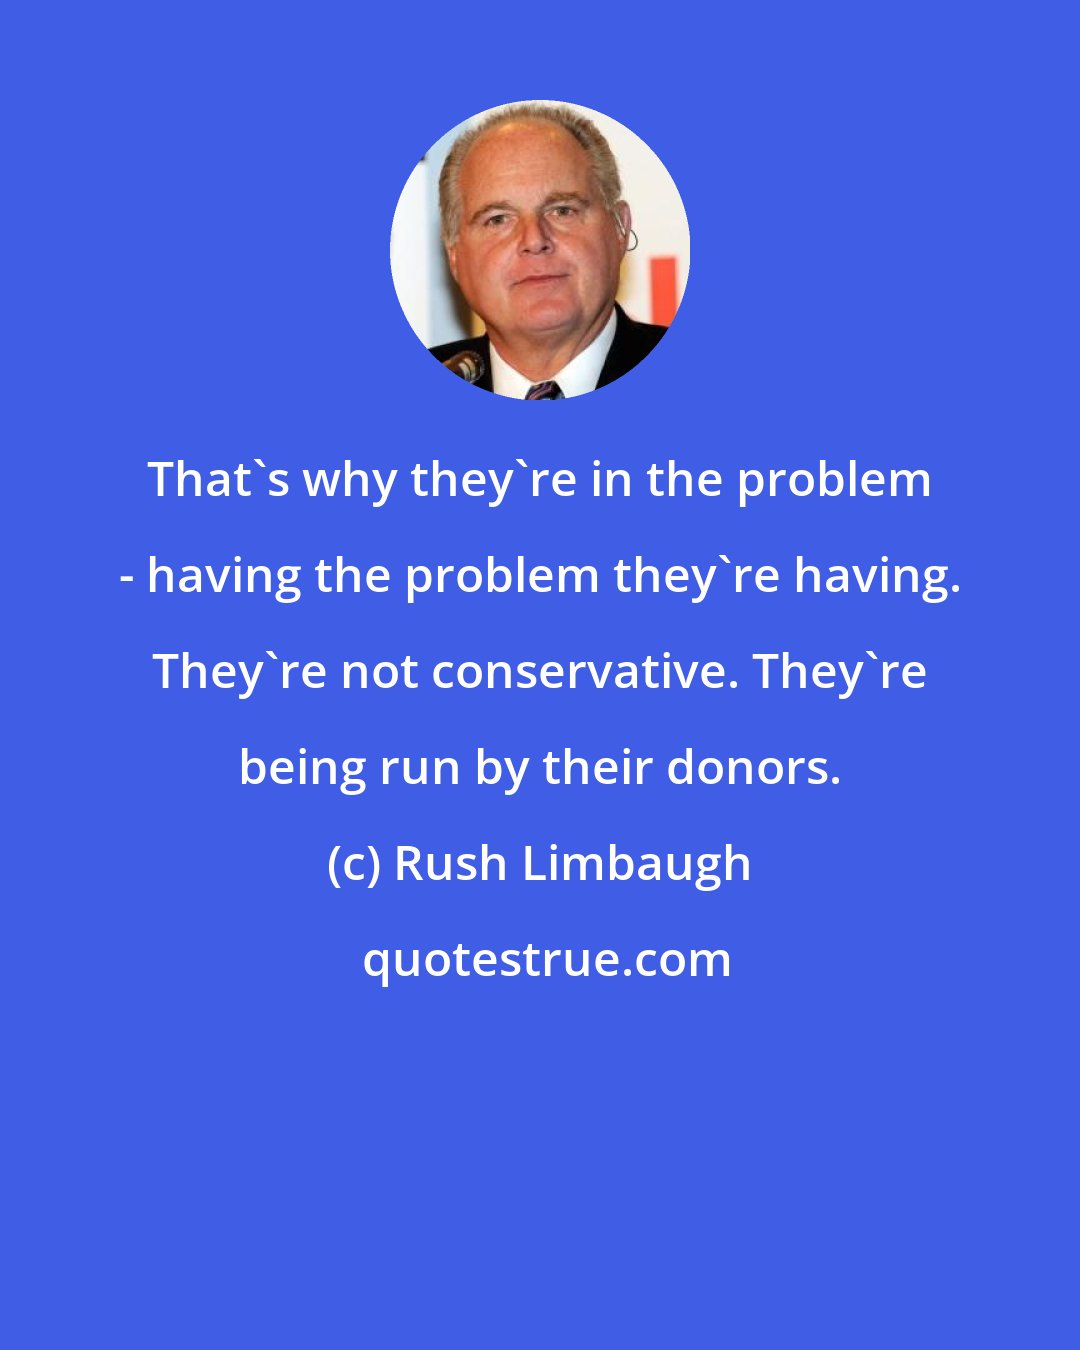 Rush Limbaugh: That's why they're in the problem - having the problem they're having. They're not conservative. They're being run by their donors.